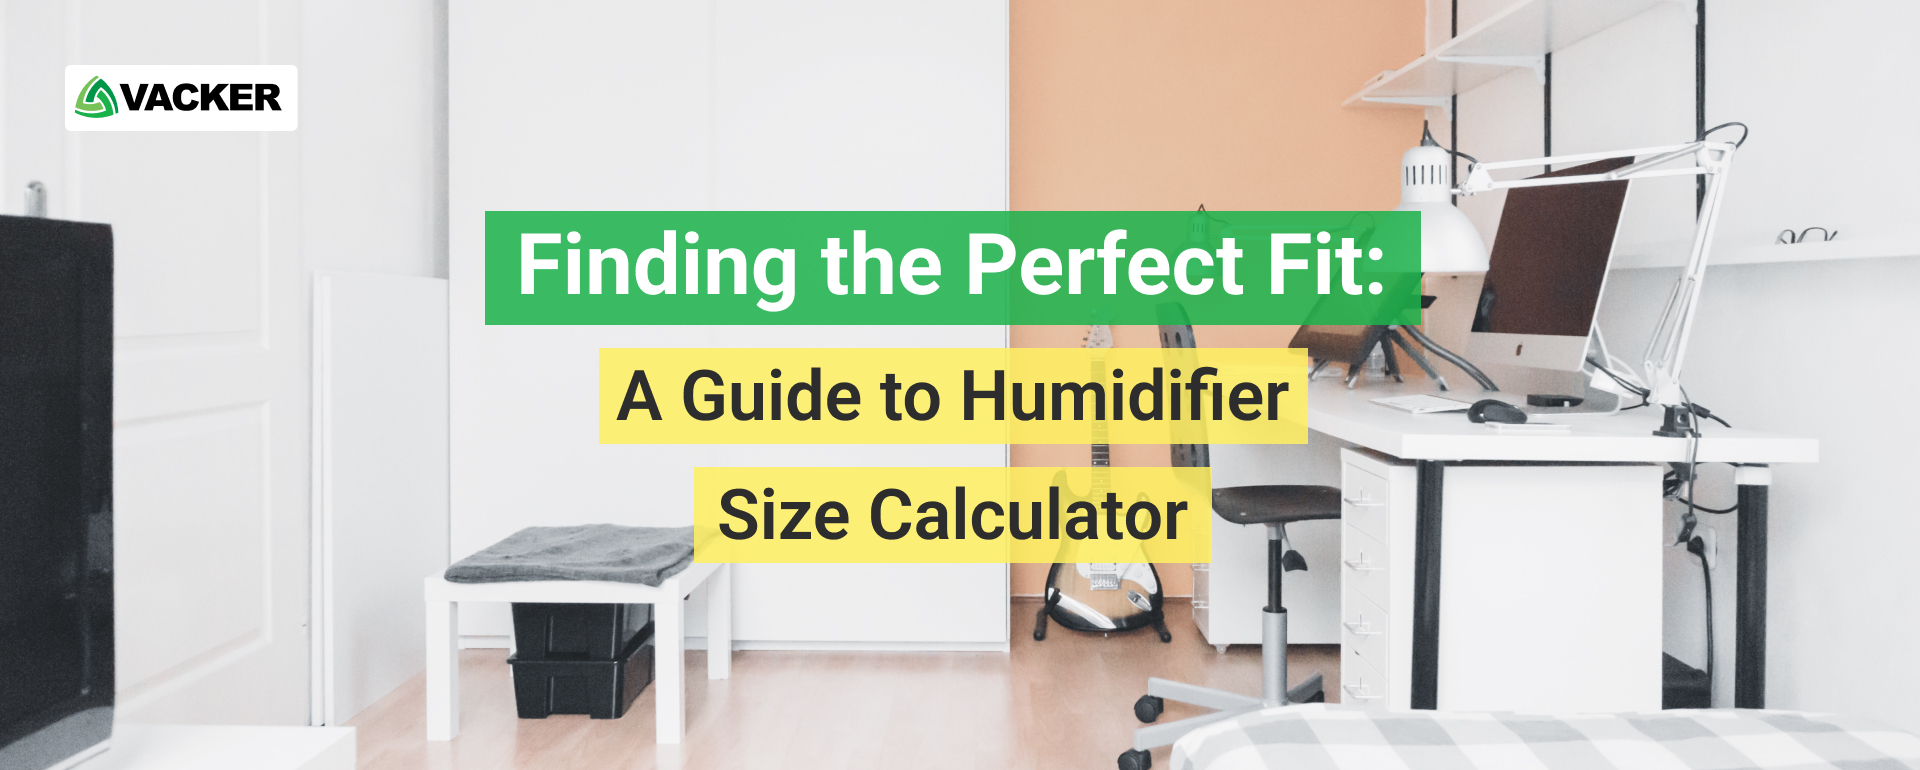 Finding the Perfect Fit: A Guide to Humidifier Size Calculator